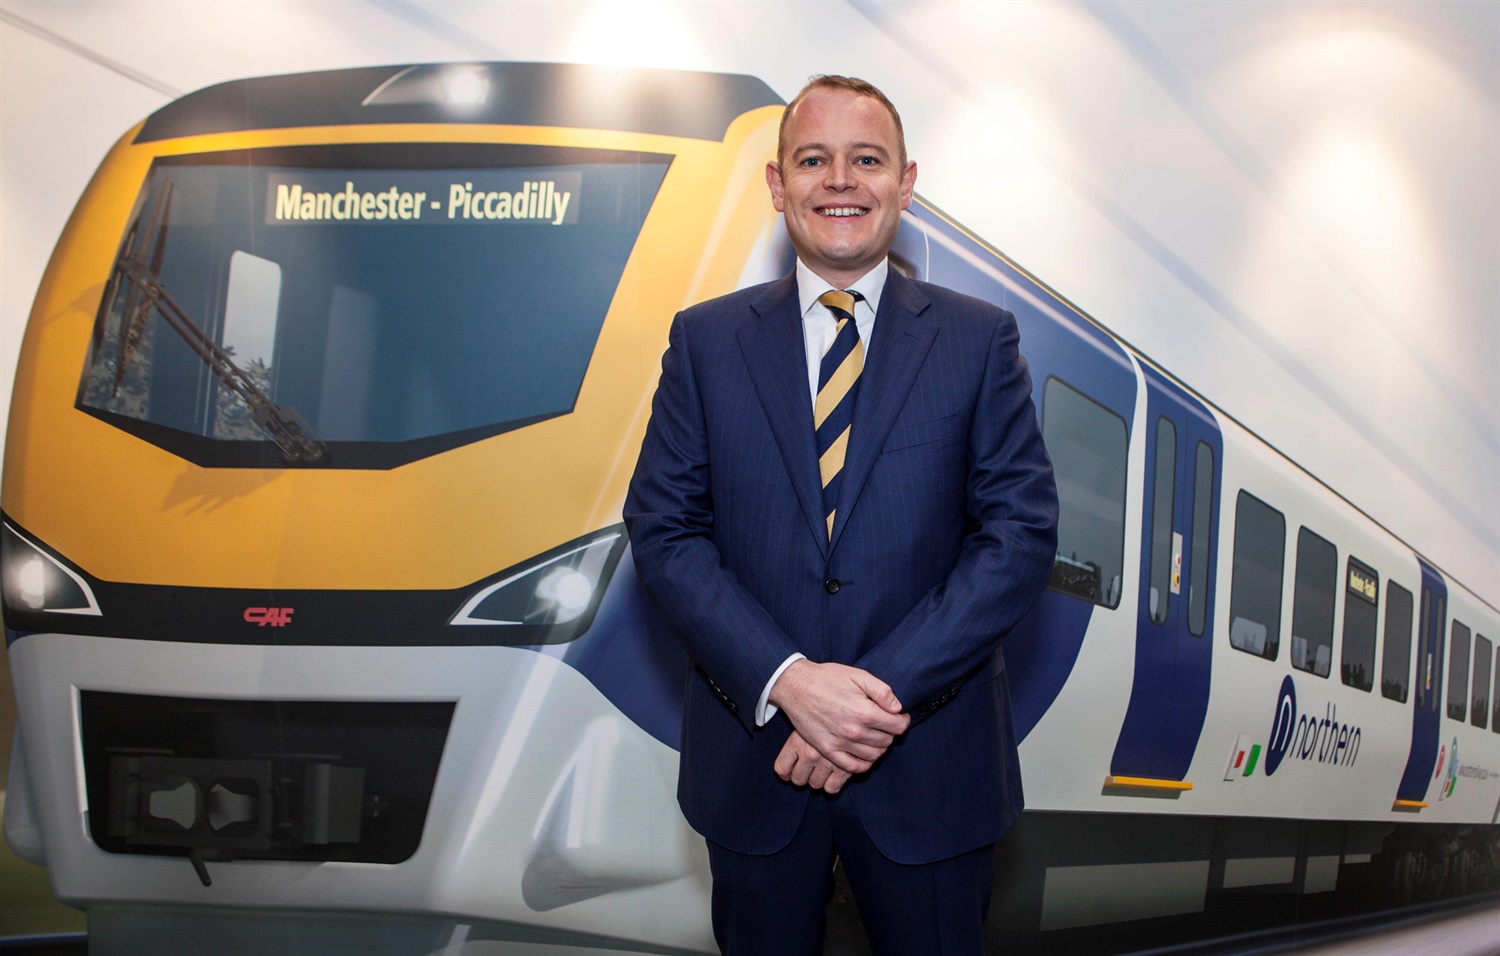 Creation of devolved Northern Route ‘critical’, says TOC boss